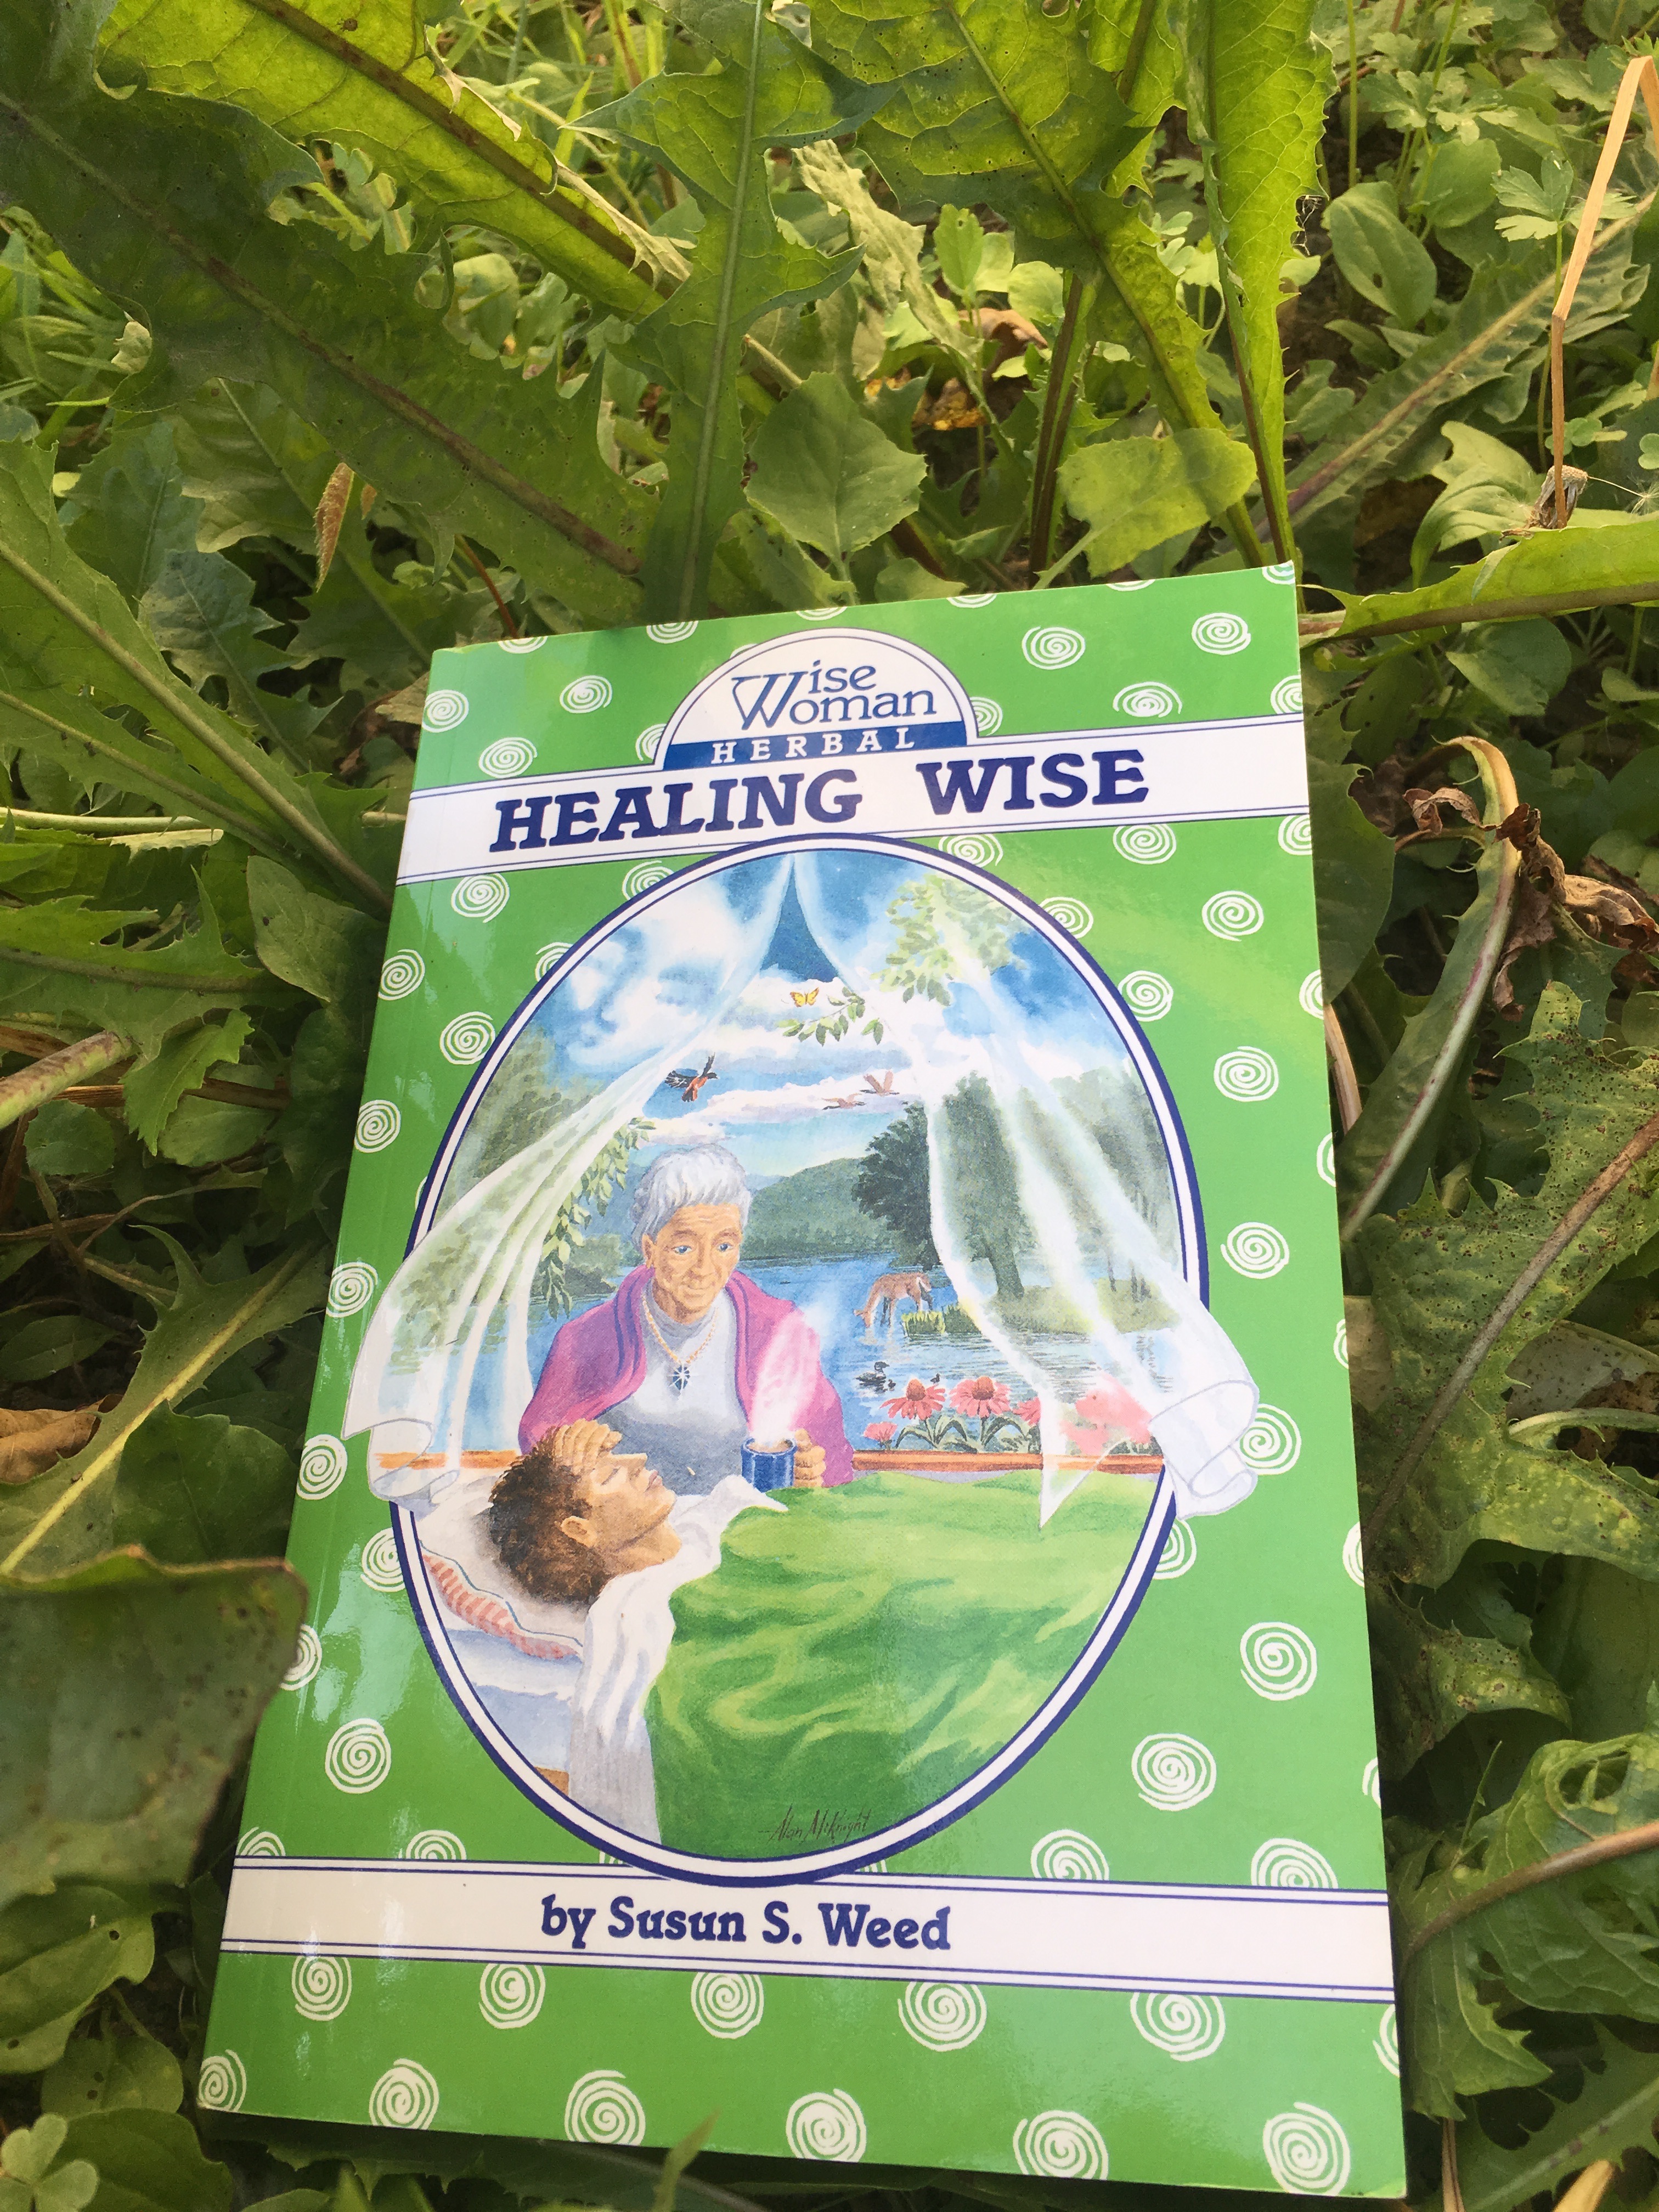 Book Recommendations: Susun Weed’s Healing Wise; Wise Woman Herbal for the Childbearing Year & New Menopausal Years